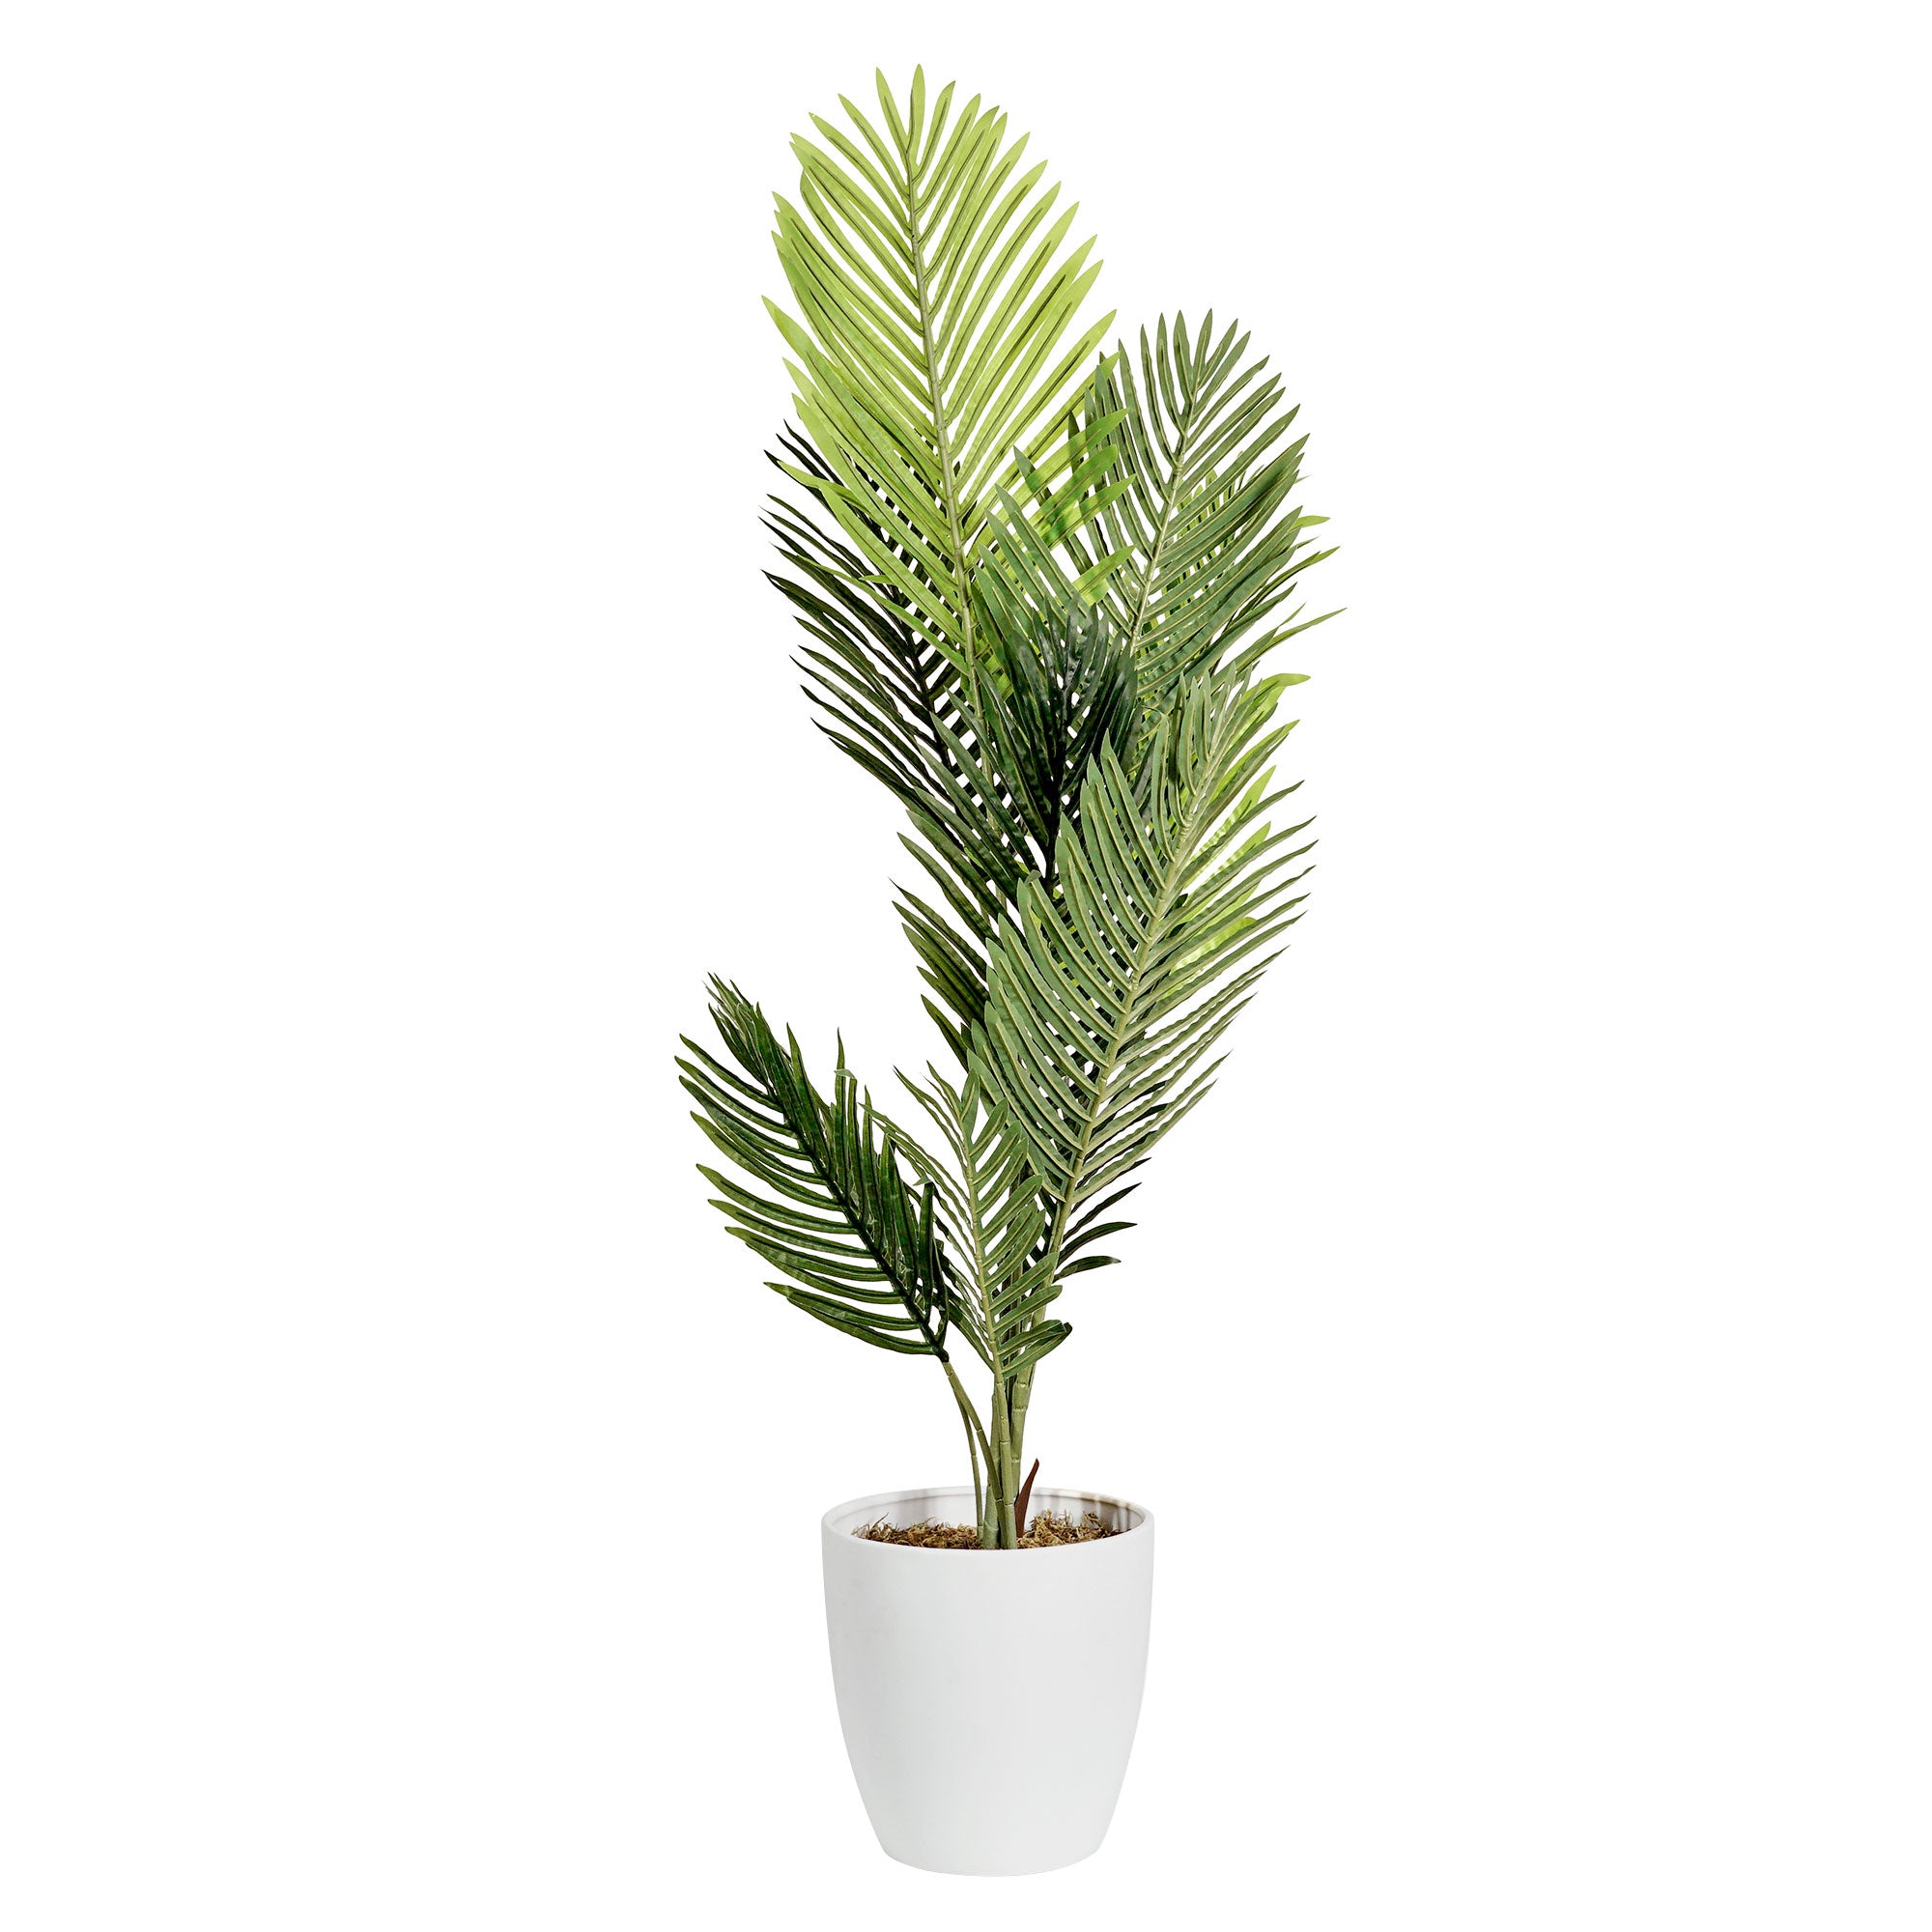 Artificial Palm Tree in White Tapered Ceramic Pot - 48